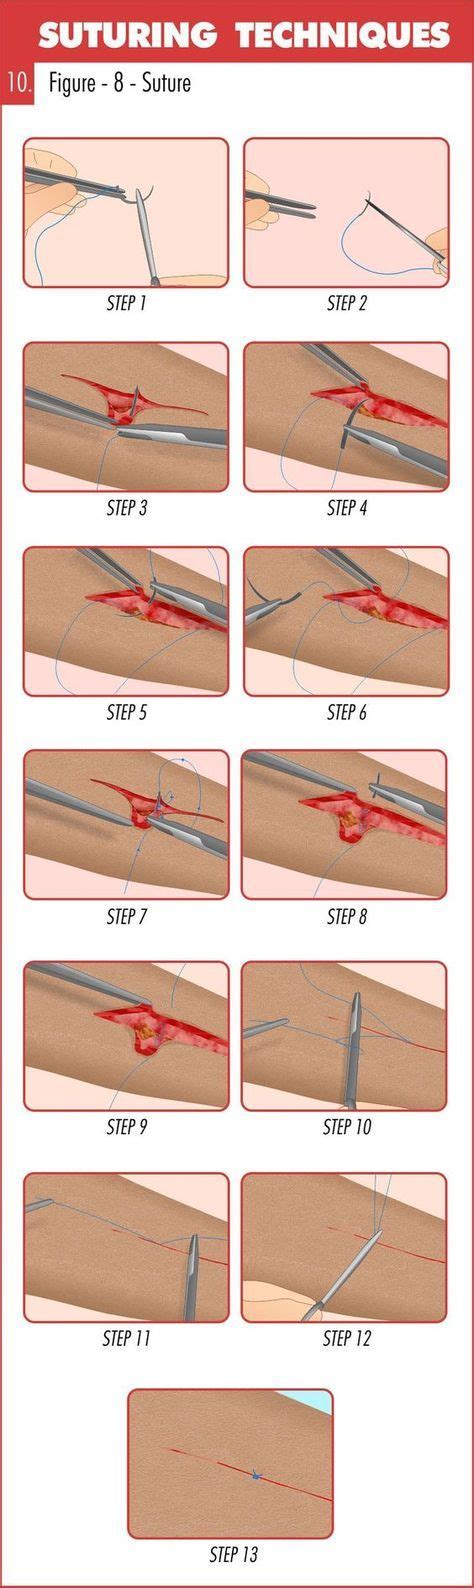 Complete Guide To Mastering Suturing Techniques Suturing Techniques